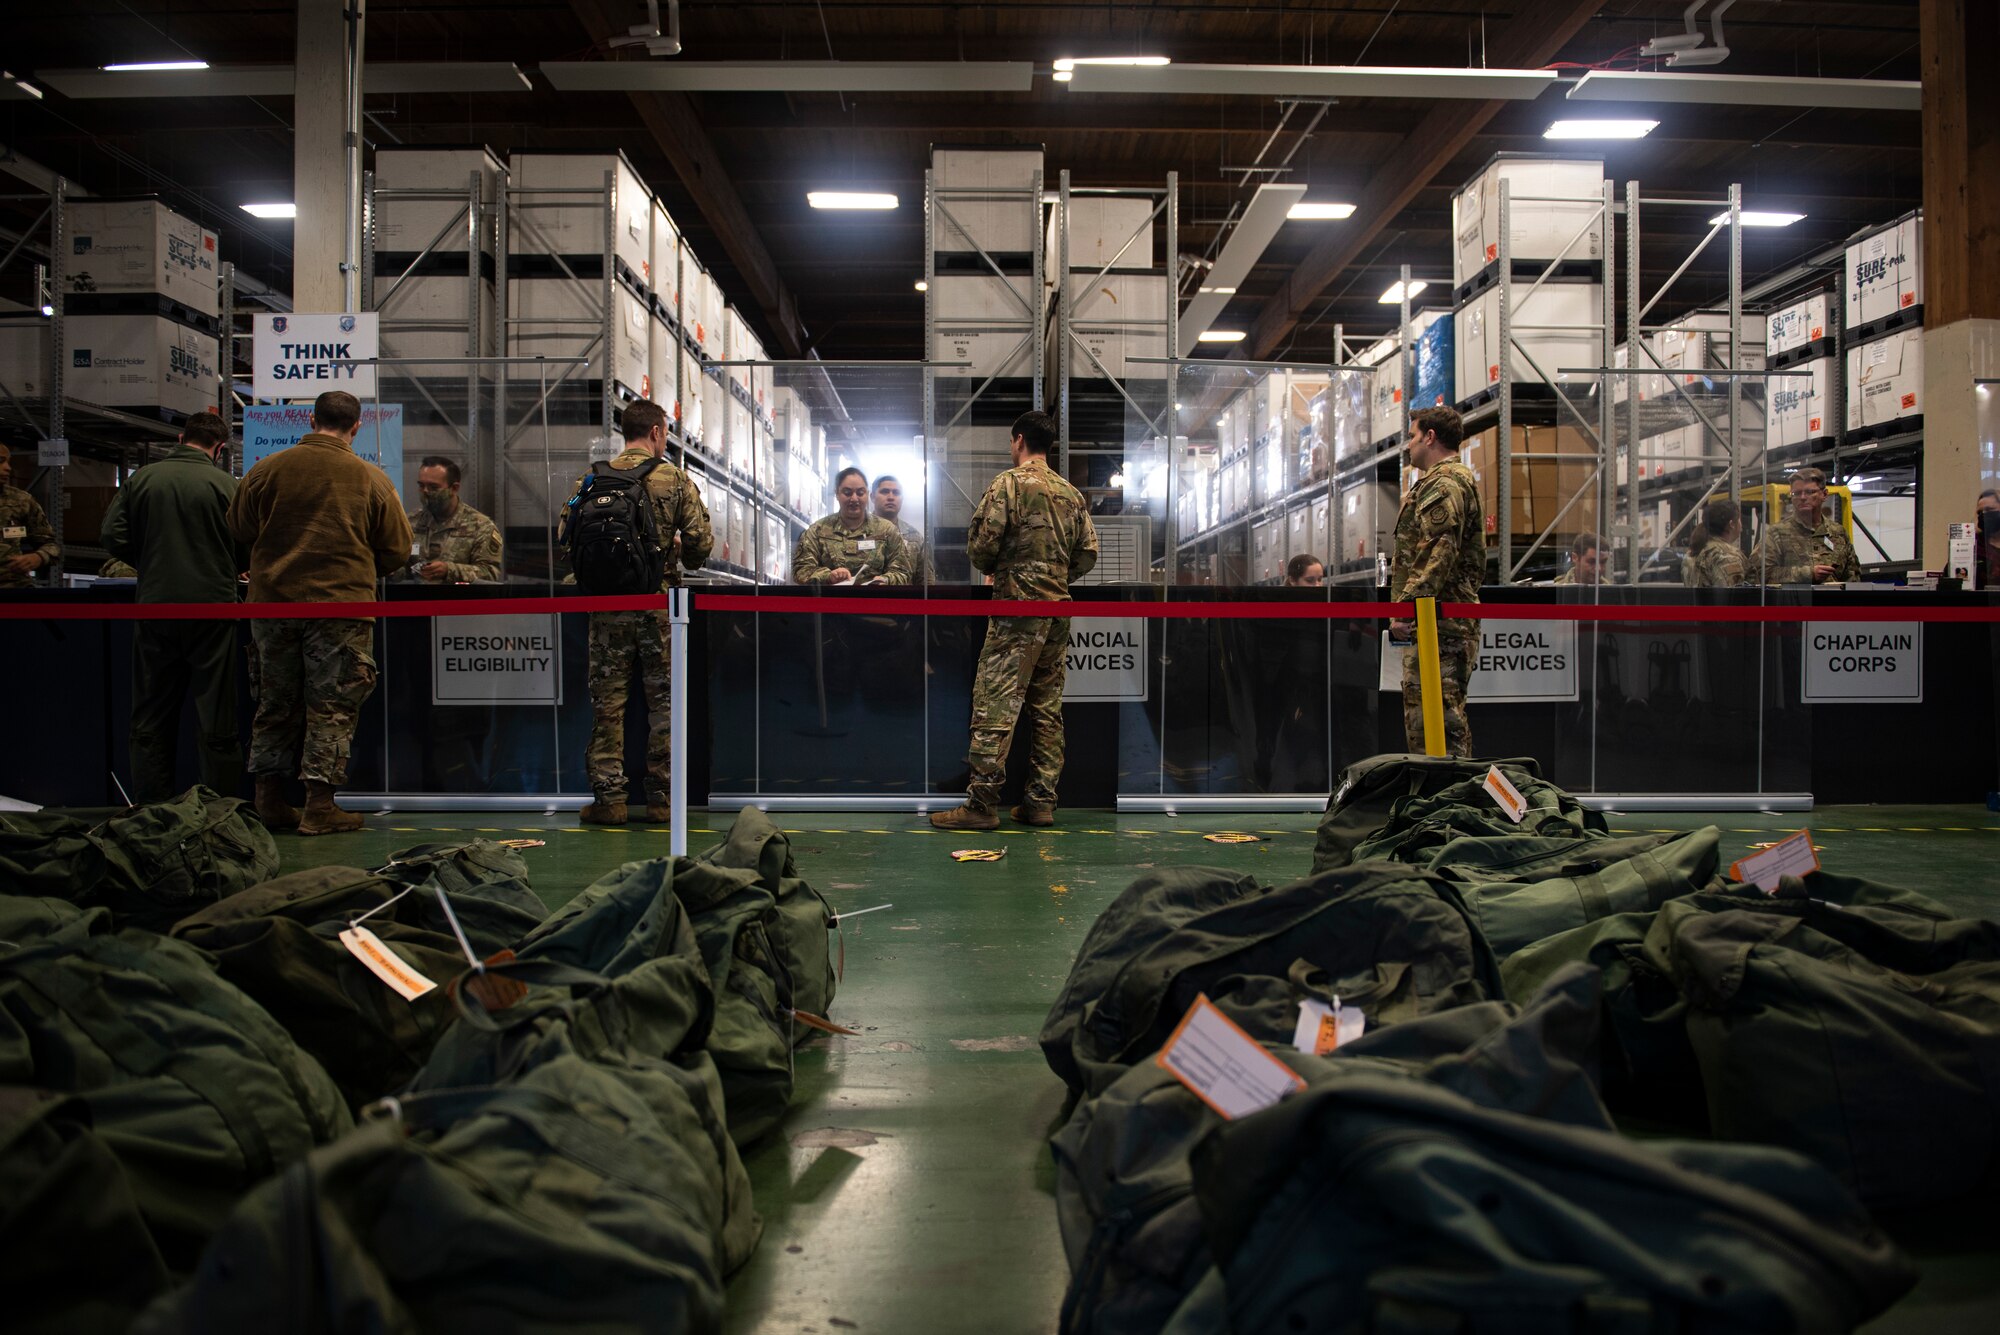 U.S. Air Force Airmen process through the deployment line as part of Exercise Rainier War 22A at Joint Base Lewis-McChord, Washington, March 15, 2022. Rainier War 22A exercised and evaluated the wing’s ability to employ the force and its  ability to perform during wartime and/or contingency taskings in a high-intensity, wartime contested, degraded and operationally limited environment while supporting the contingency operations against a near-peer adversary. (U.S. Air Force photo by Master Sgt. Julius Delos Reyes)